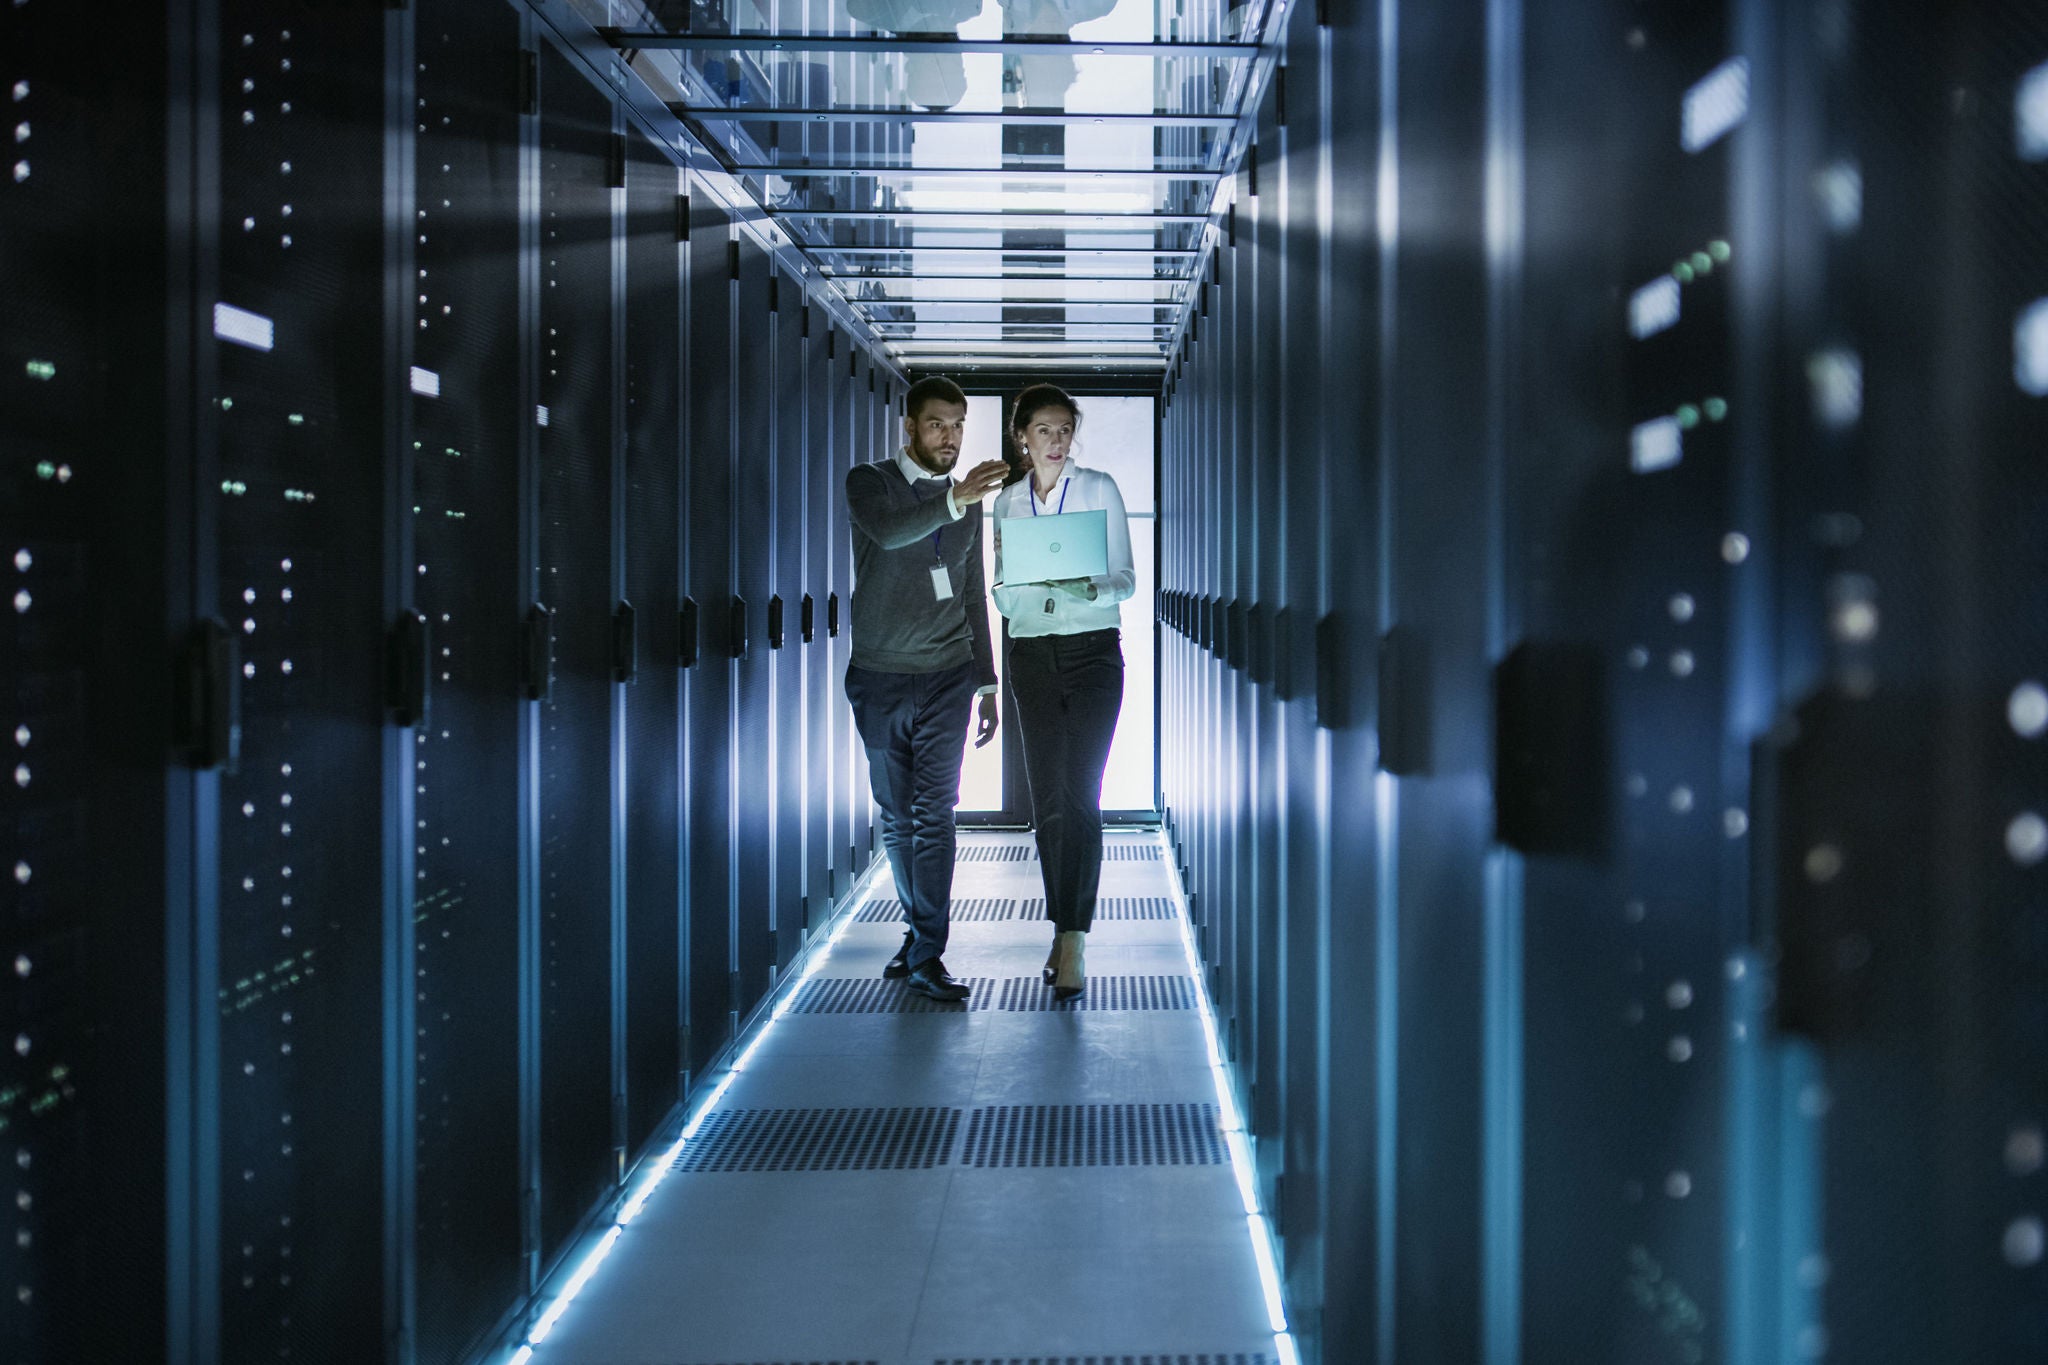 IT technician and engineer working in a data center full of rack servers